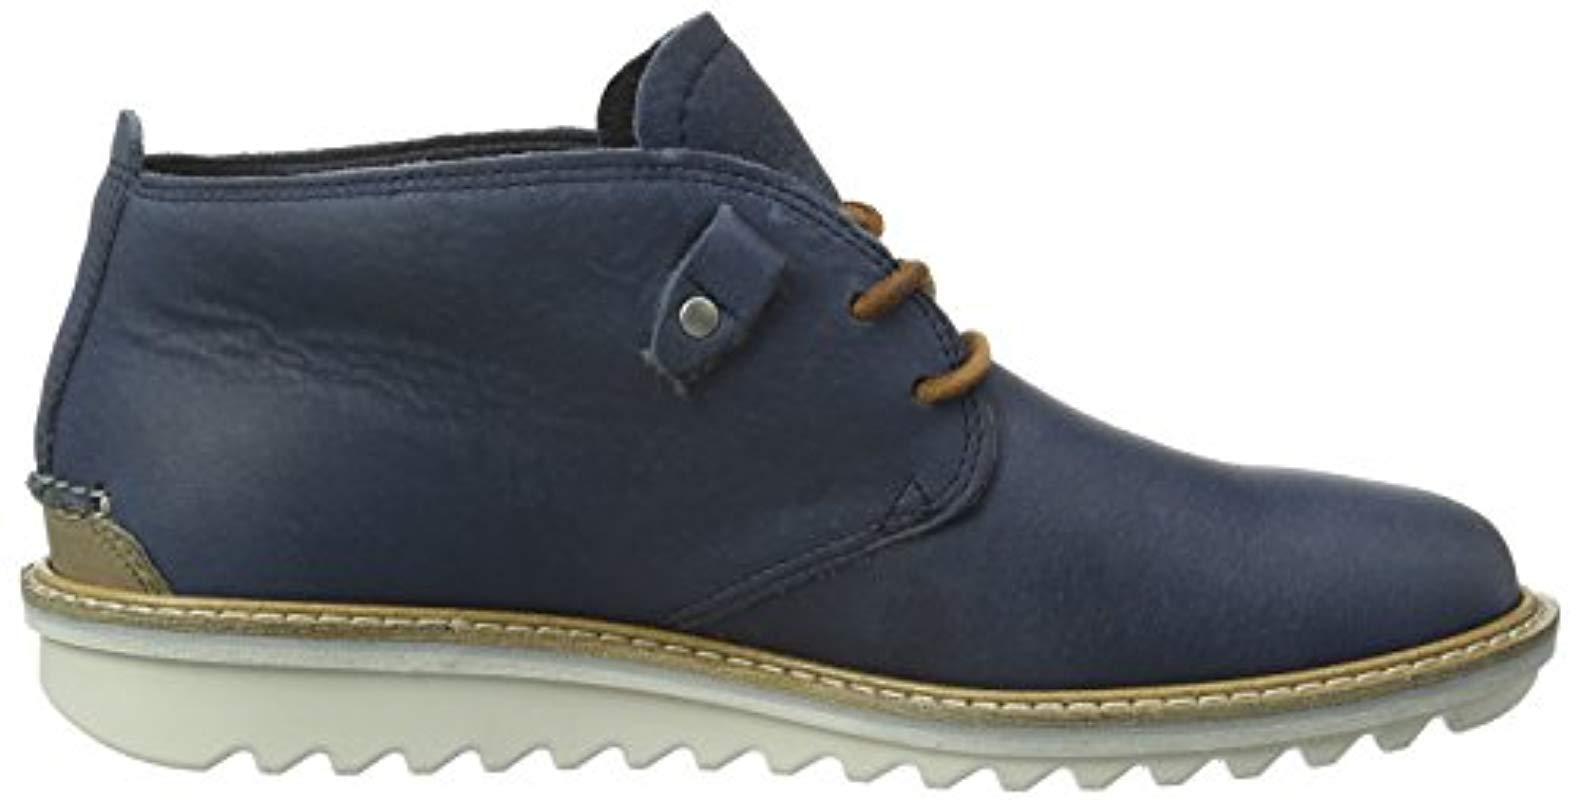 Ecco Elaine Flatform Ankle Boots in Blue Lyst UK